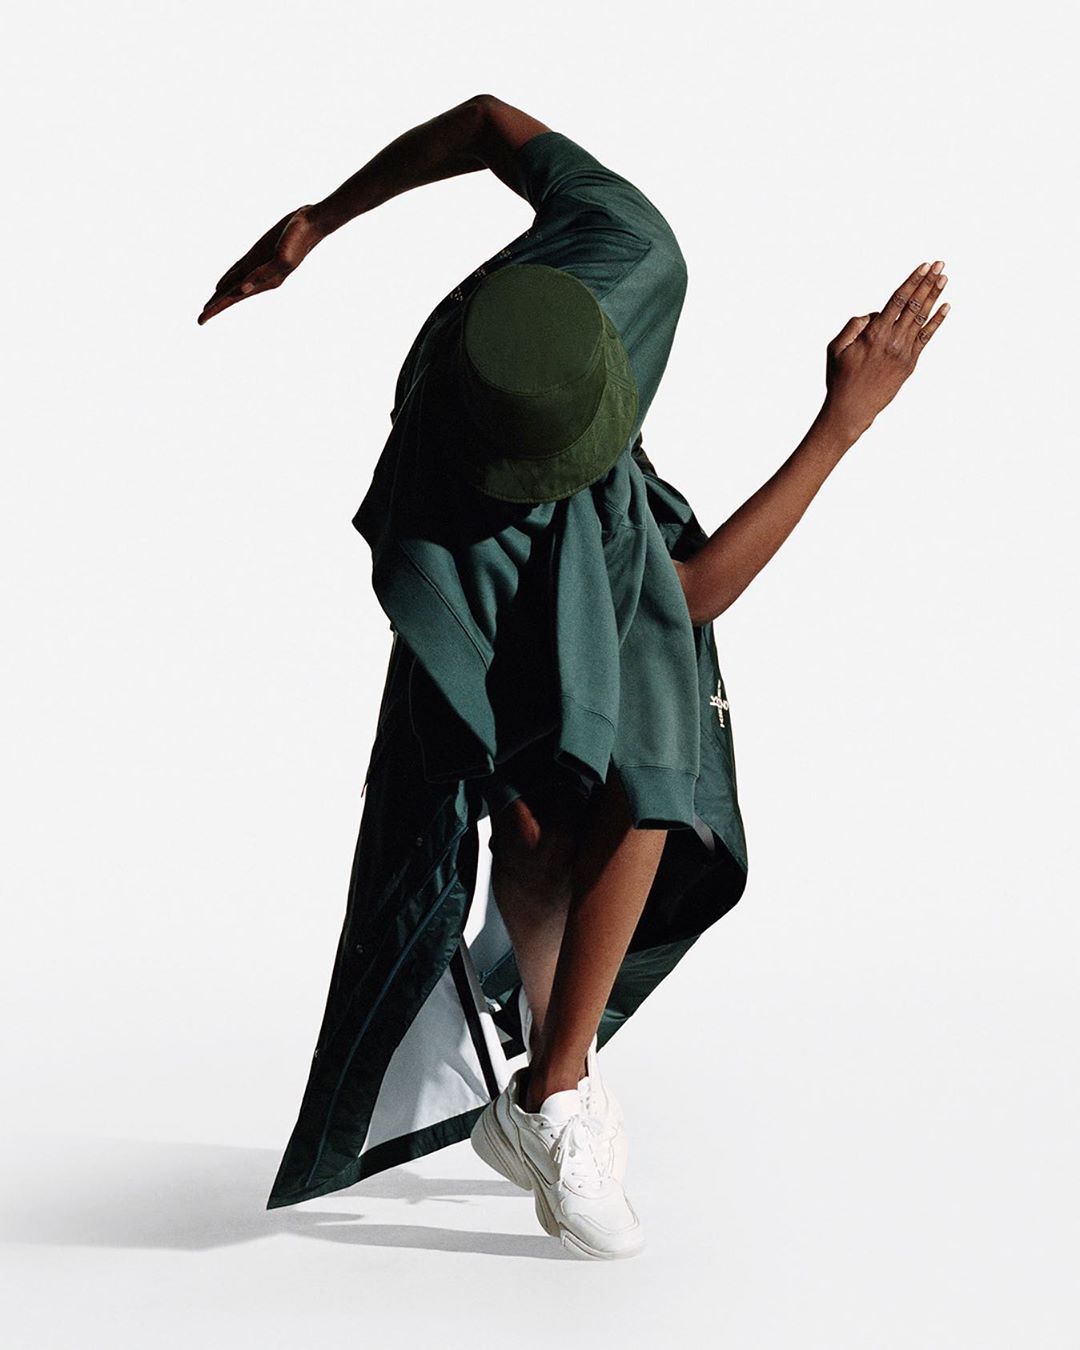 KENZO - #KENZOsport
Functional and gender-fluid, the KENZO Sport collection is available now on KENZO.com. Join the #KENZOsportchallenge on Tiktok, and shop the collection now on KENZO.com and in KENZ...